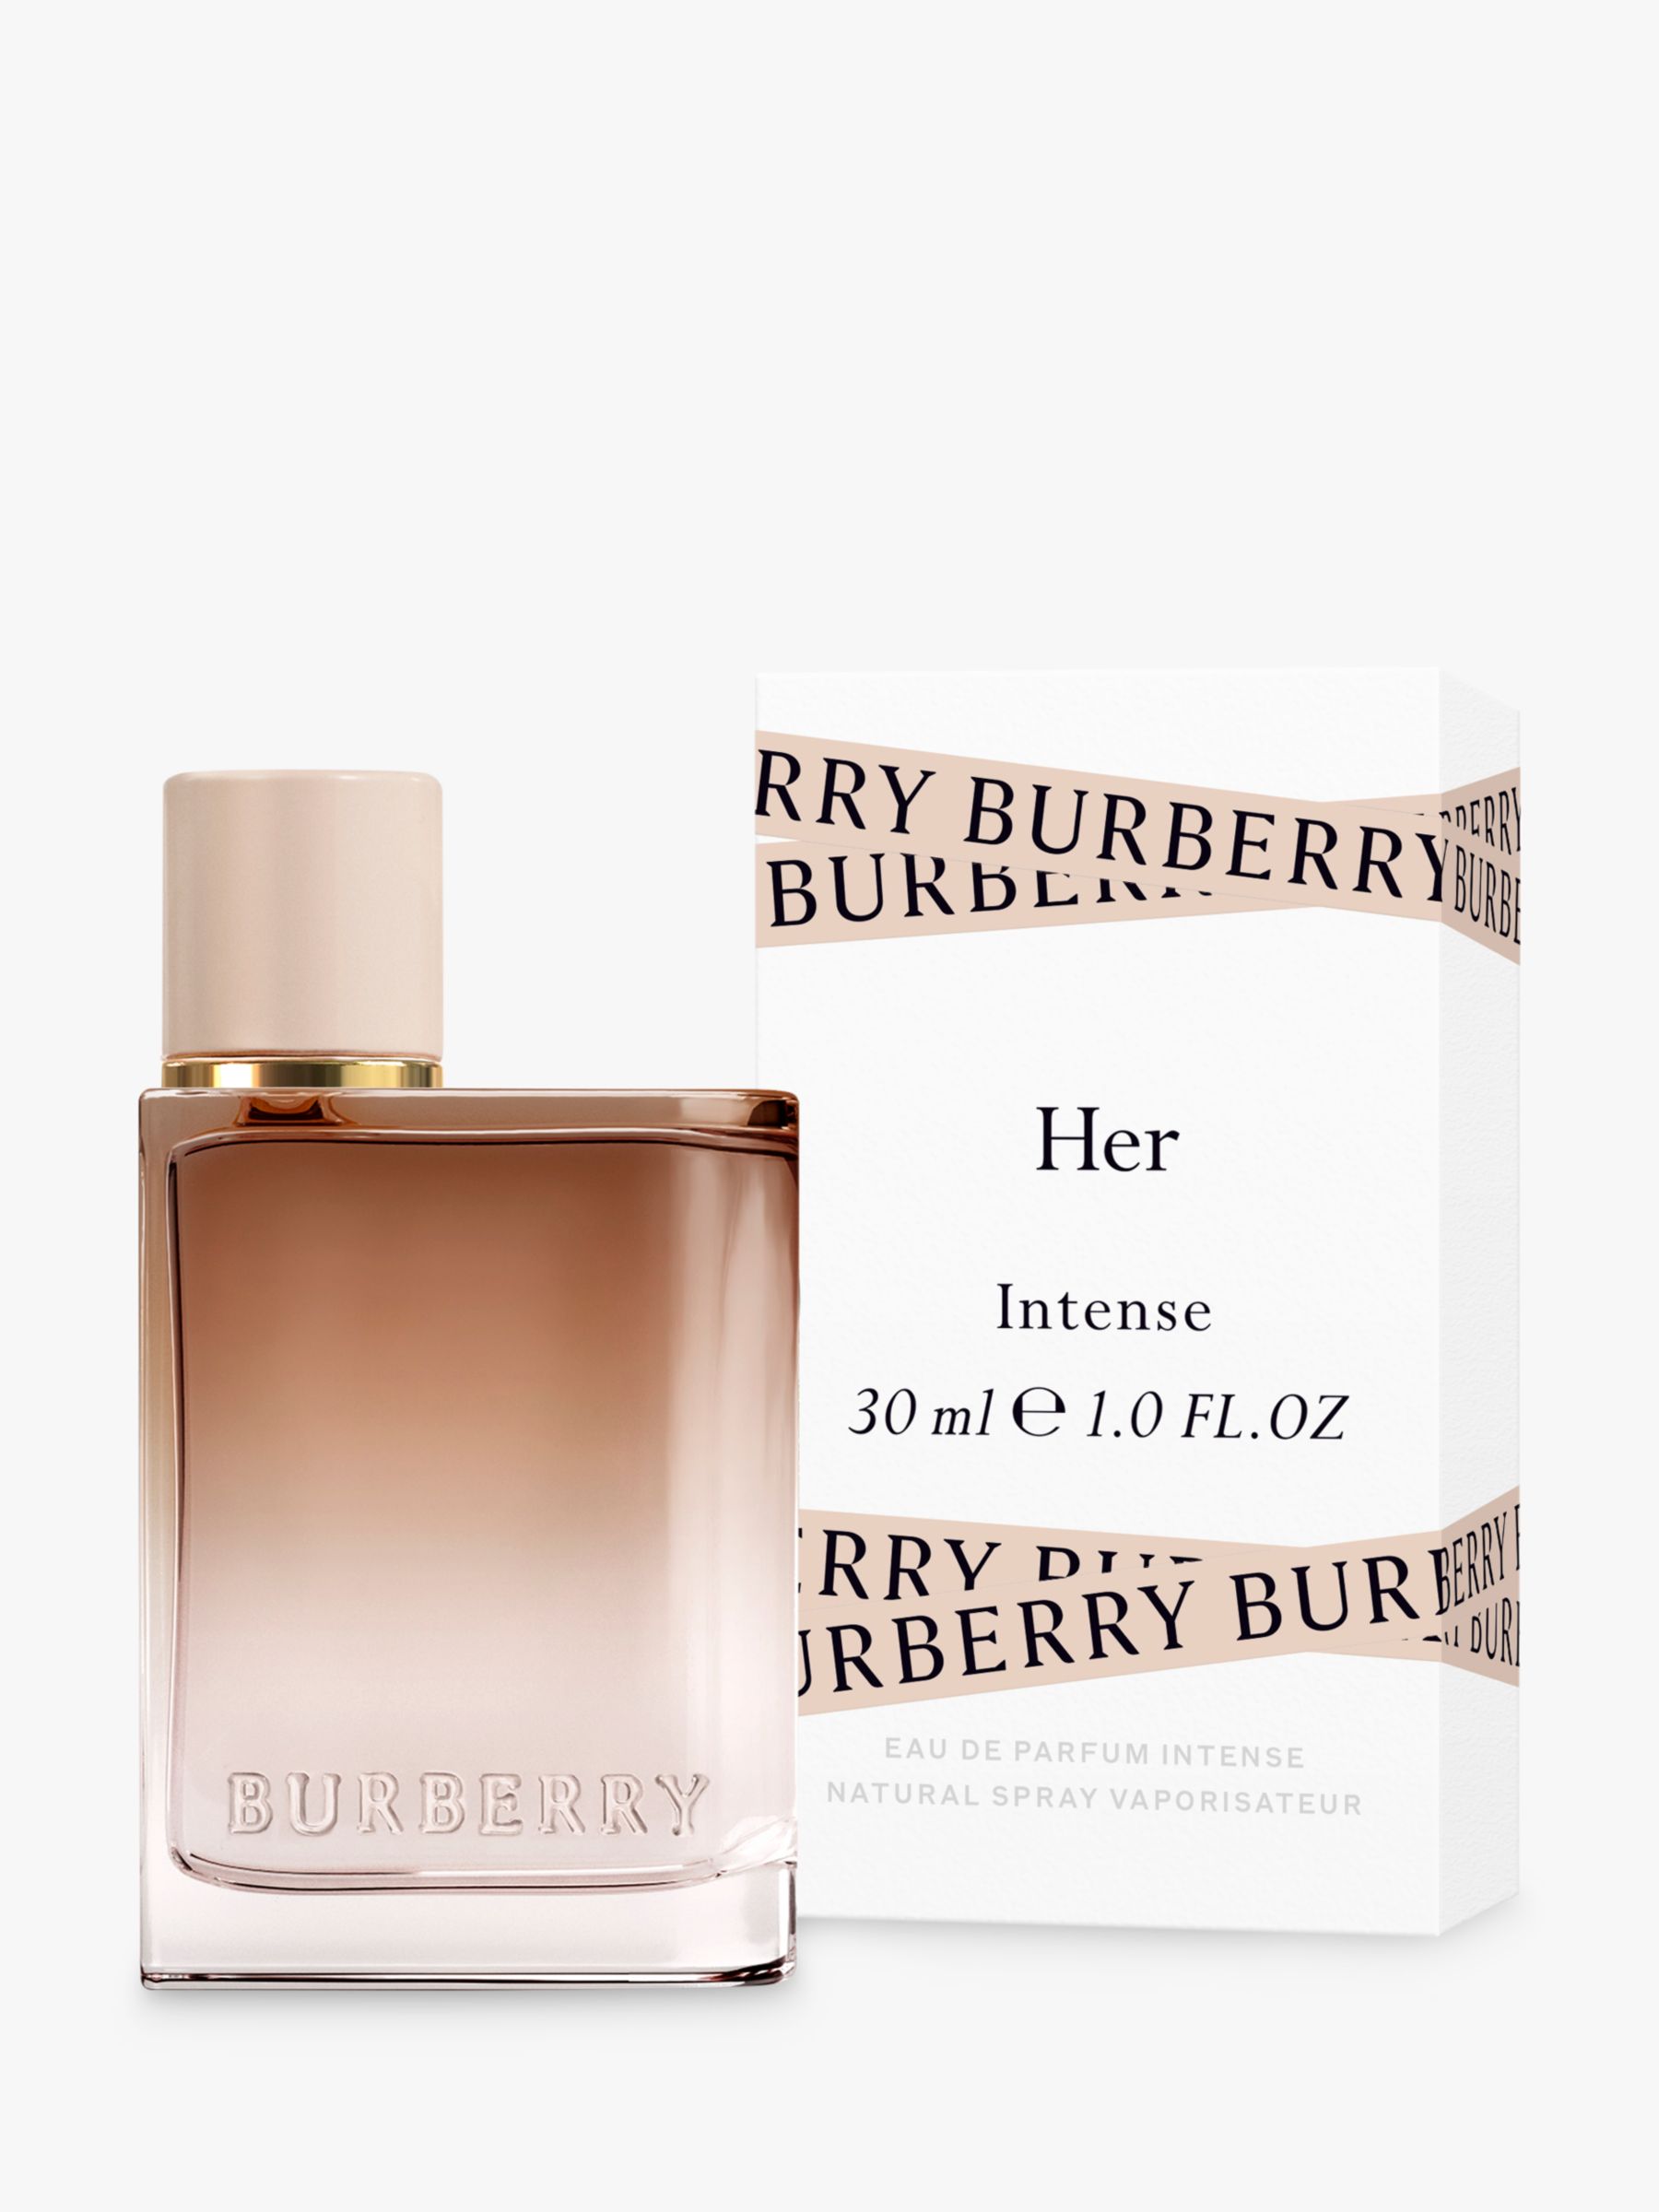 her burberry review